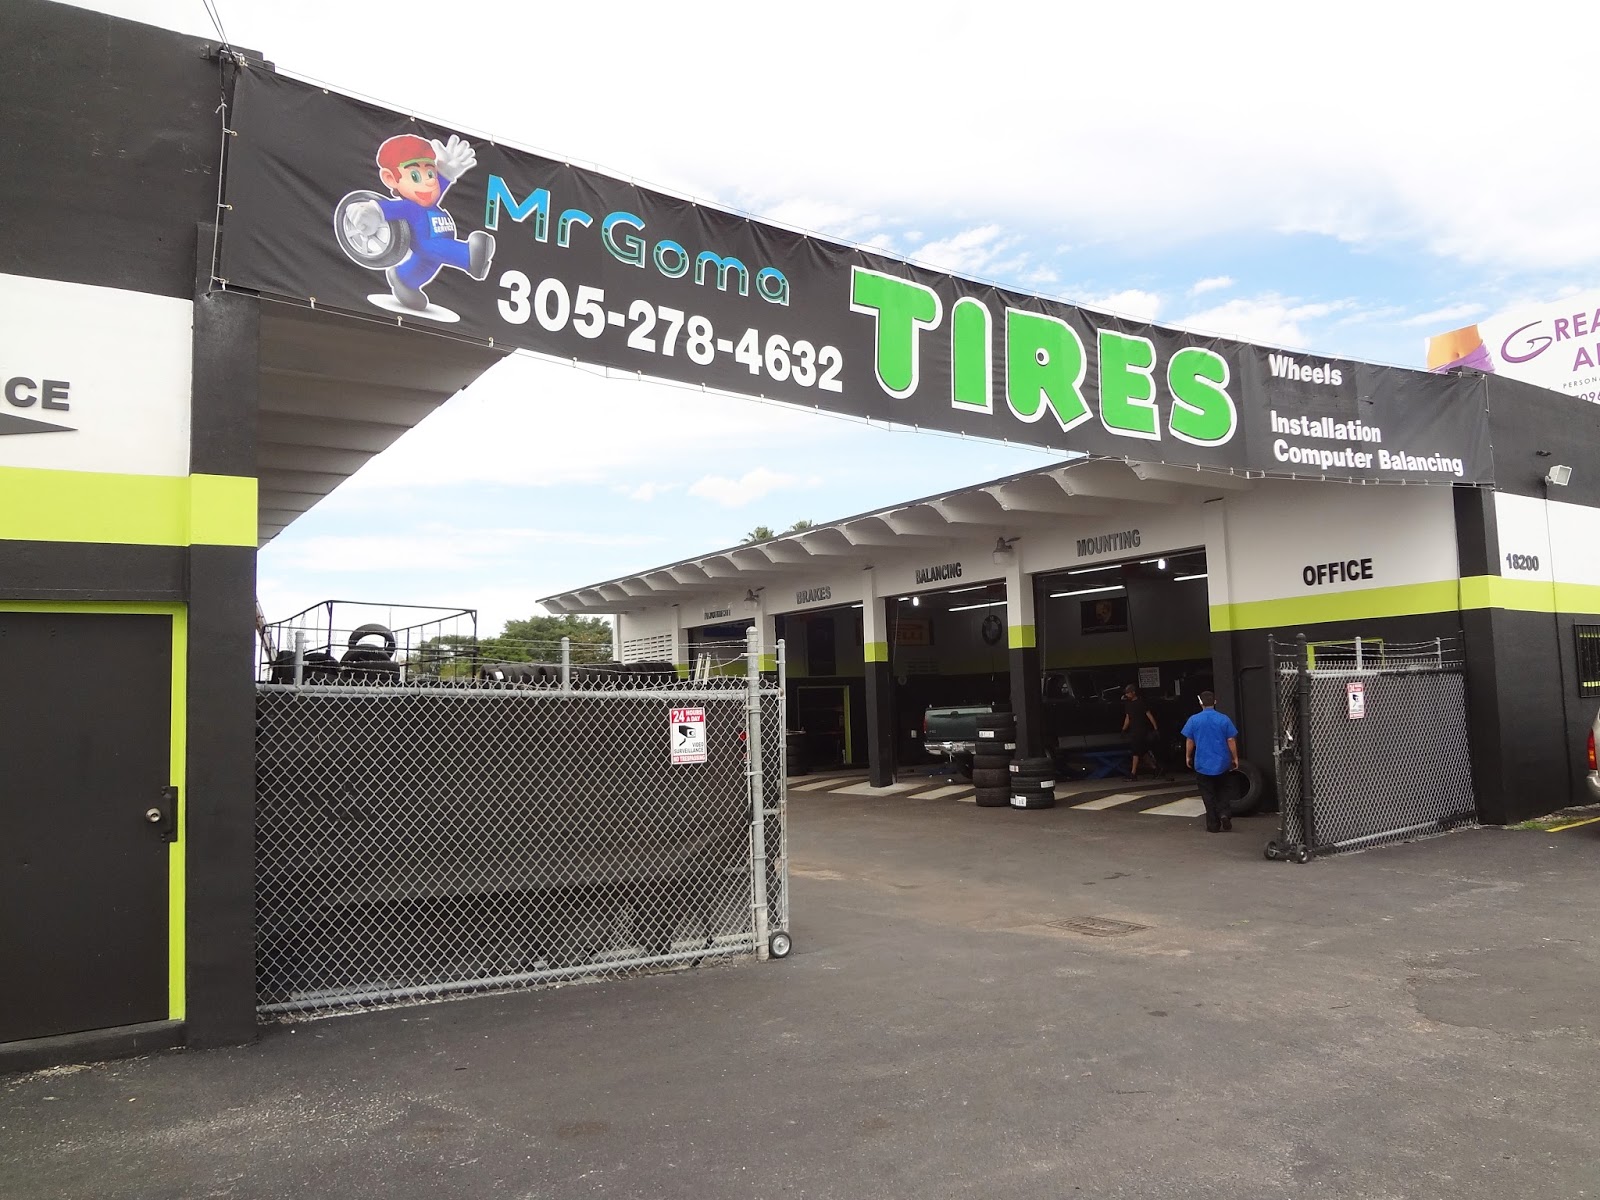 New and Used Tires & Wheels in Miami: OUR TIRE SHOPS